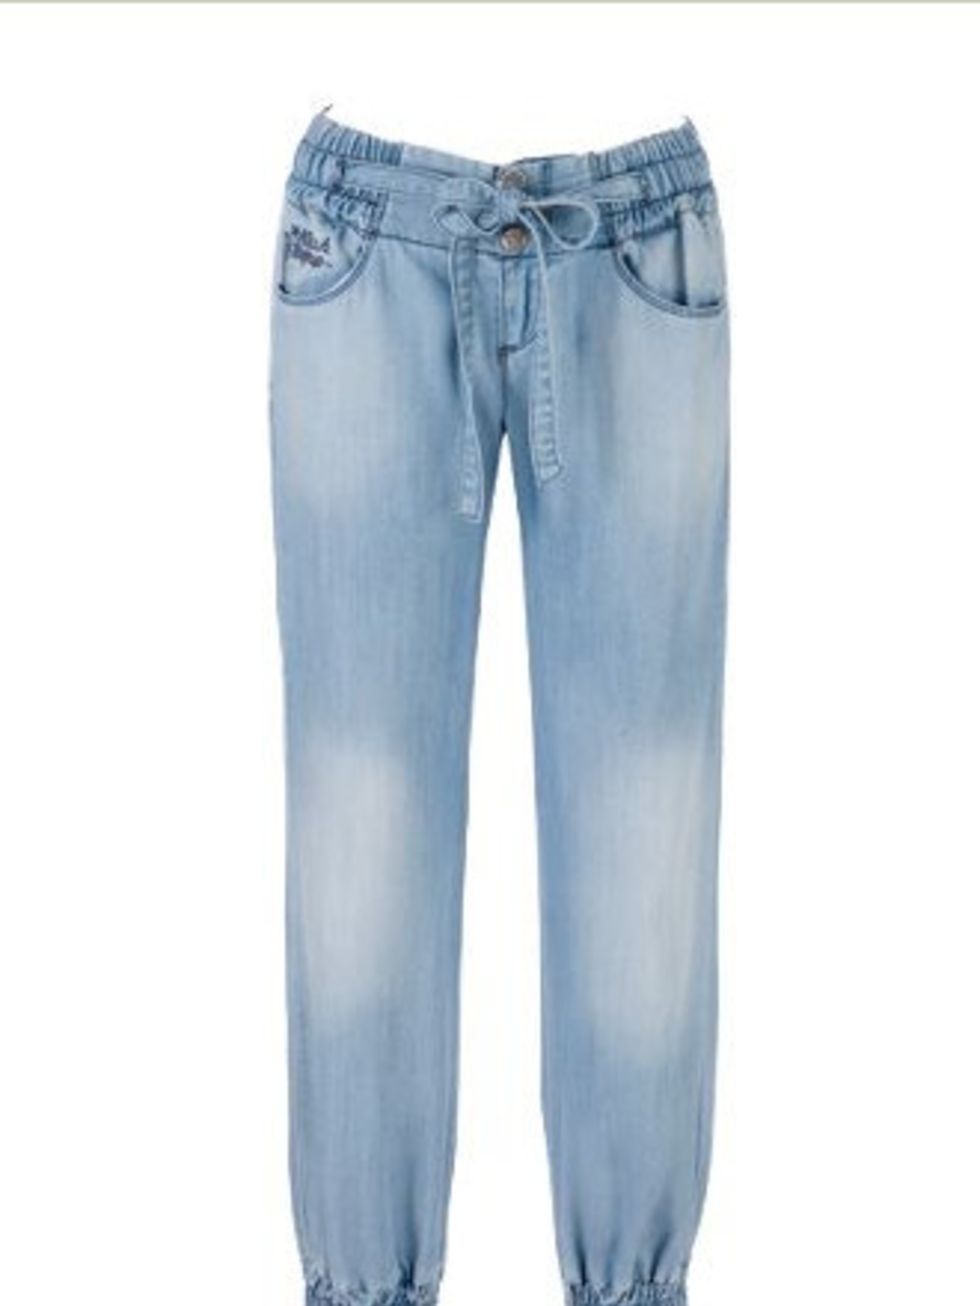 <p>For summer, the sporty vibe is in fashion. If you cant bear the thought of factoring jogging pants into your daily wardrobe, these gathered jeans with the tie waist is a very fashionable compromise.</p><p>Jeans, £75 by Killah at <a href="http://www.ol